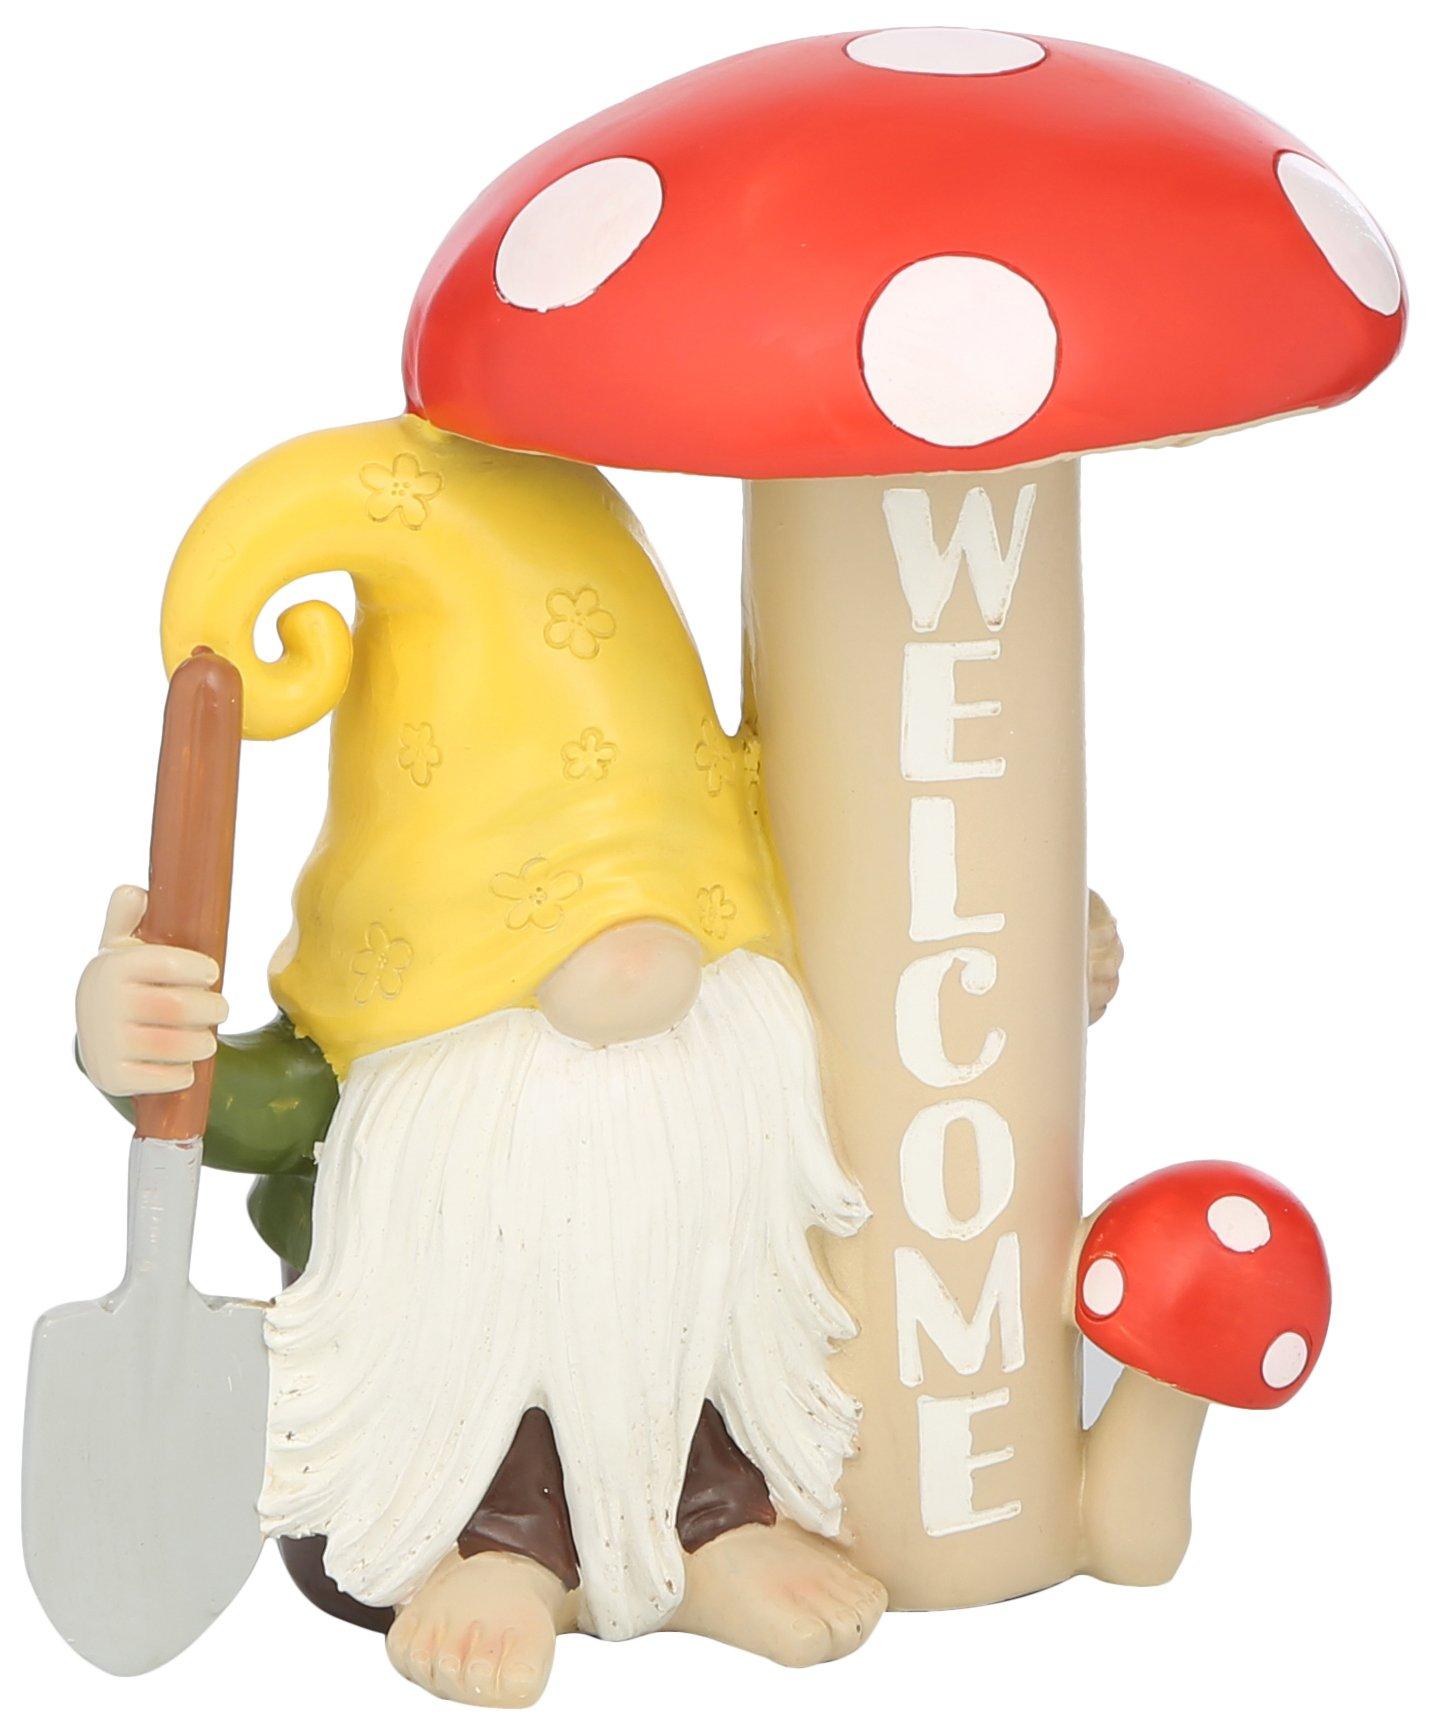 Resin Gnome and Mushroom Welcome Statue